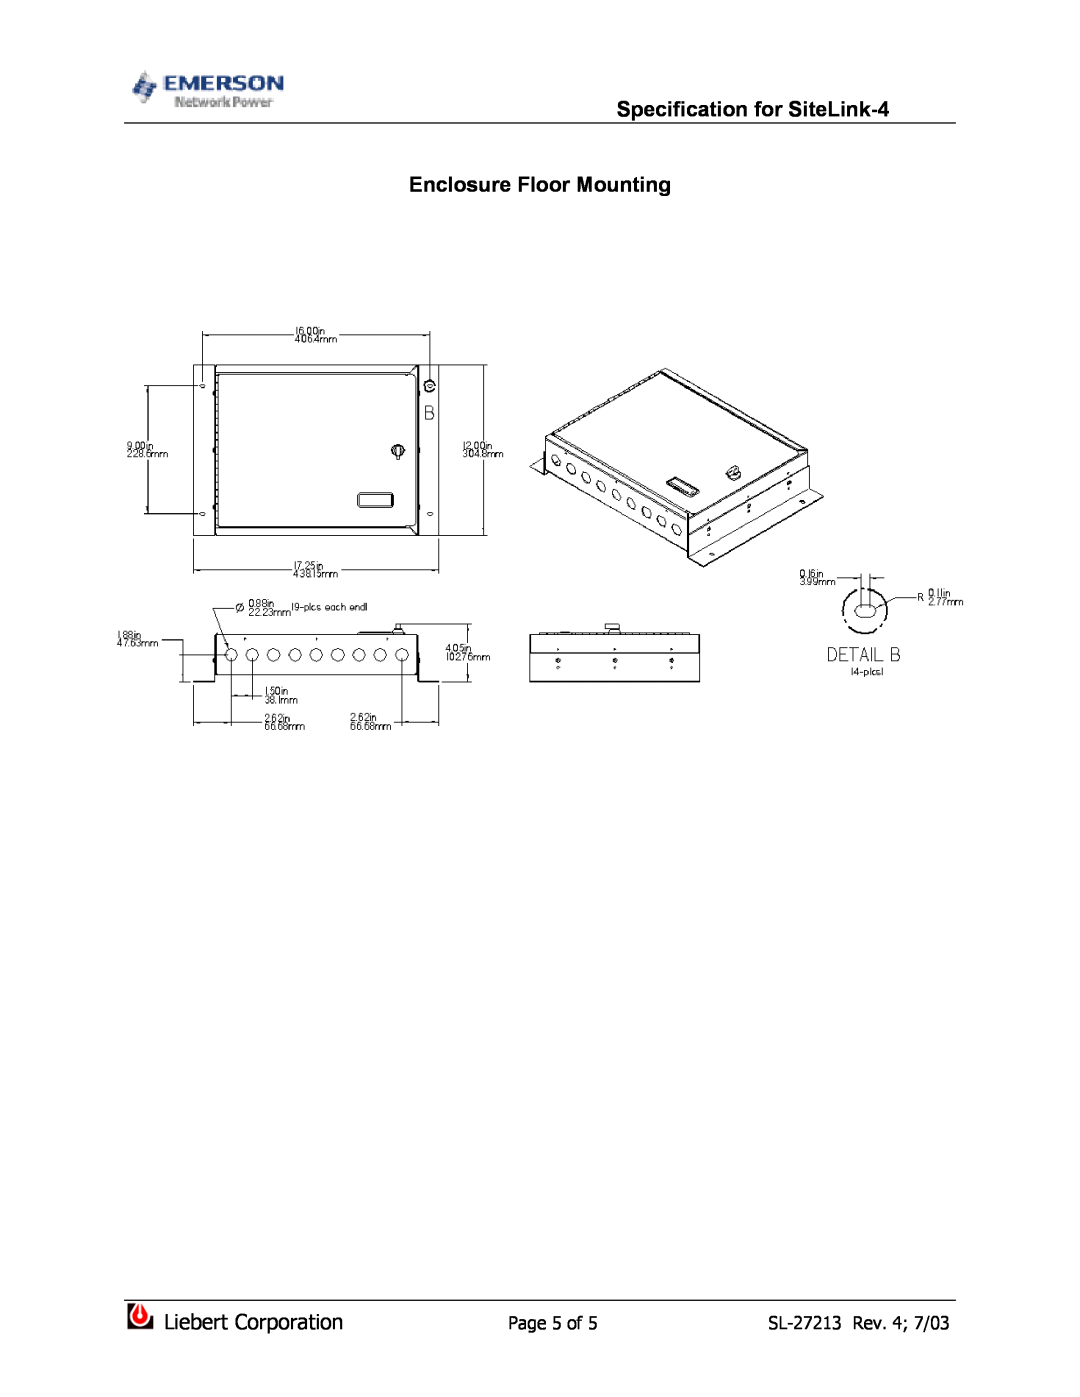 Emerson Enclosure Floor Mounting, Page 5 of, Specification for SiteLink-4, Liebert Corporation, SL-27213Rev. 4 7/03 